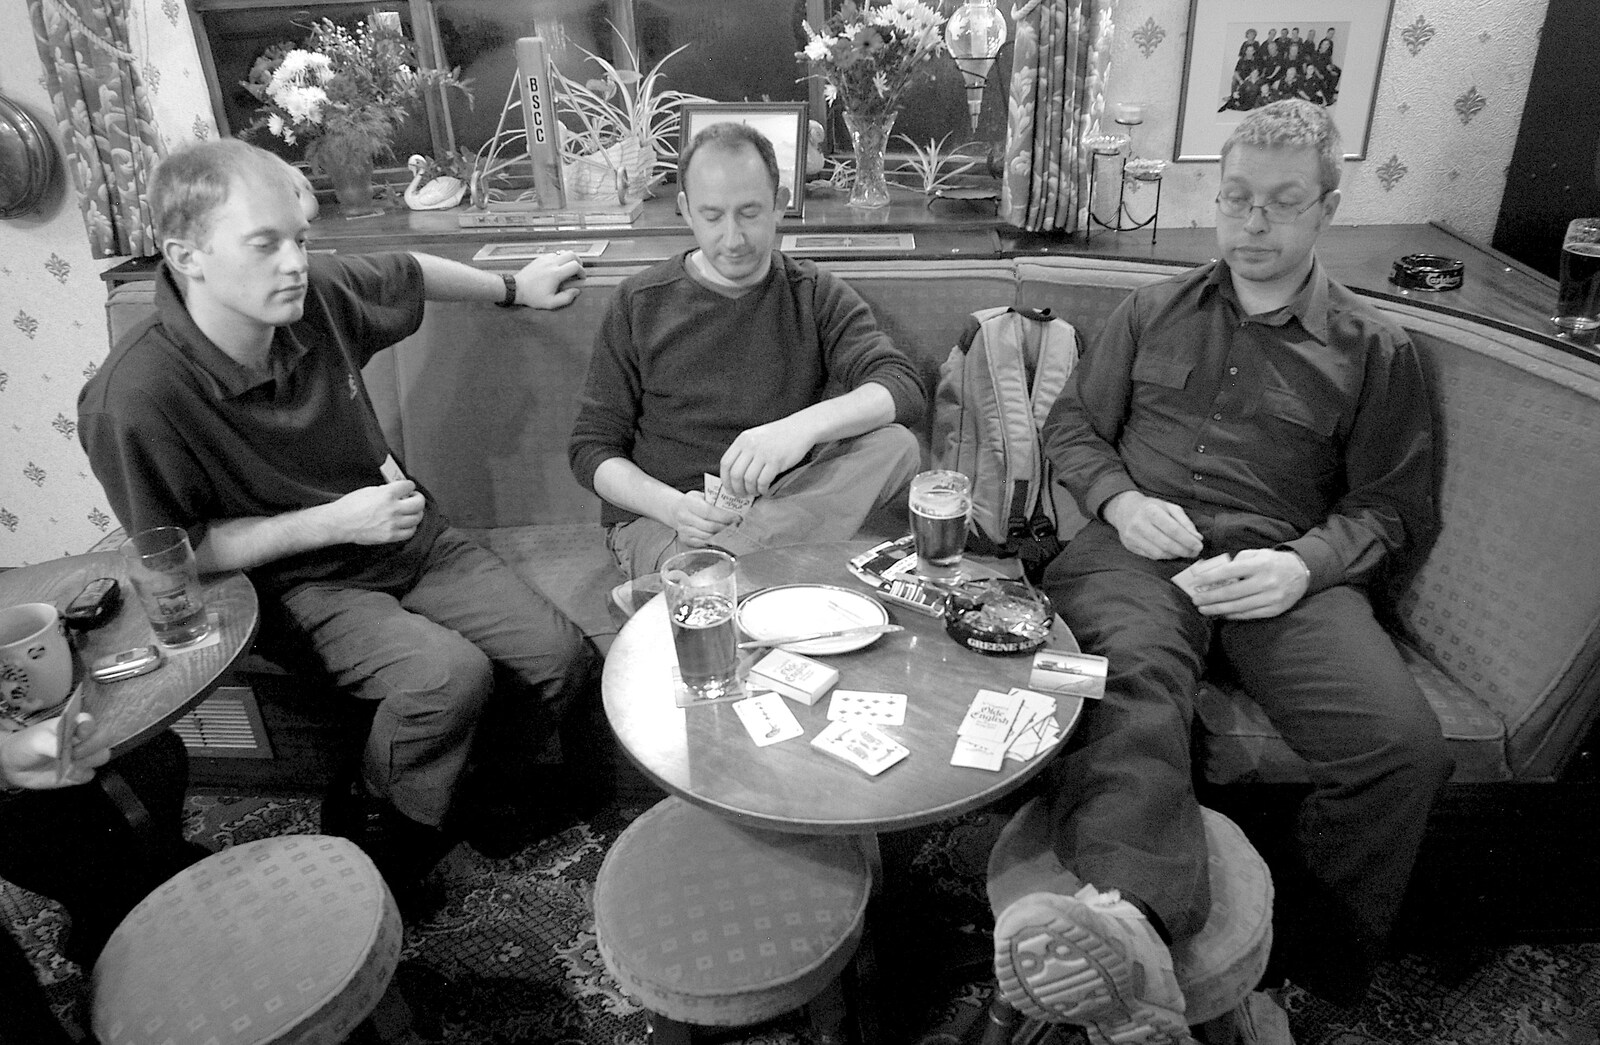 The lads look a bit glum from New Year's Eve and Day, Thorndon and Thornham, Suffolk - 1st January 2006